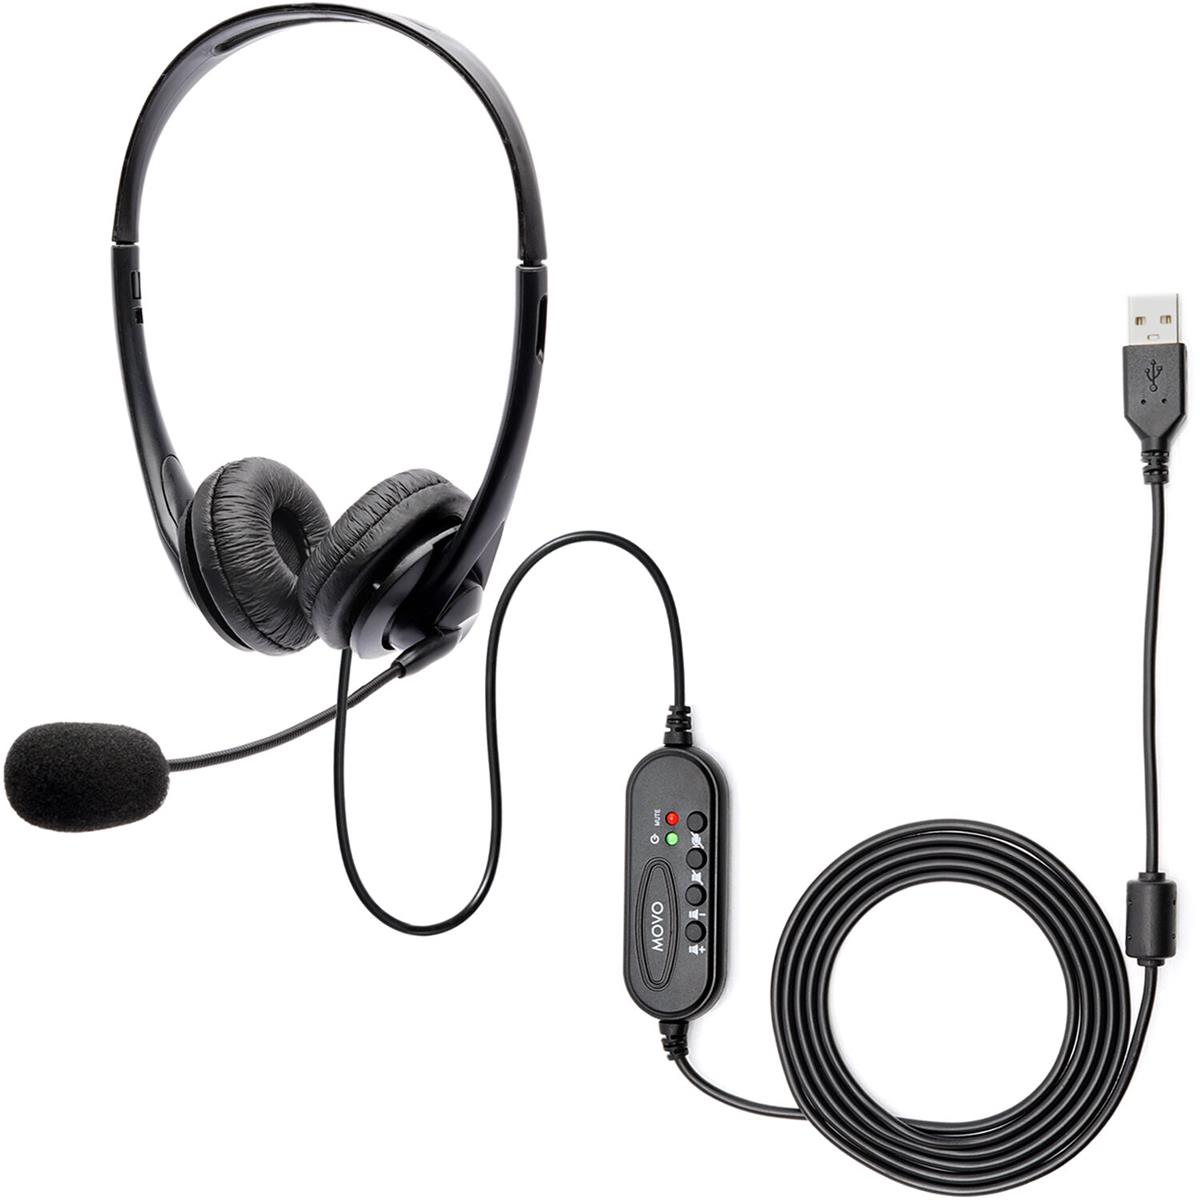 Image of Movo Photo HSM-1 USB Headset Computer Microphone